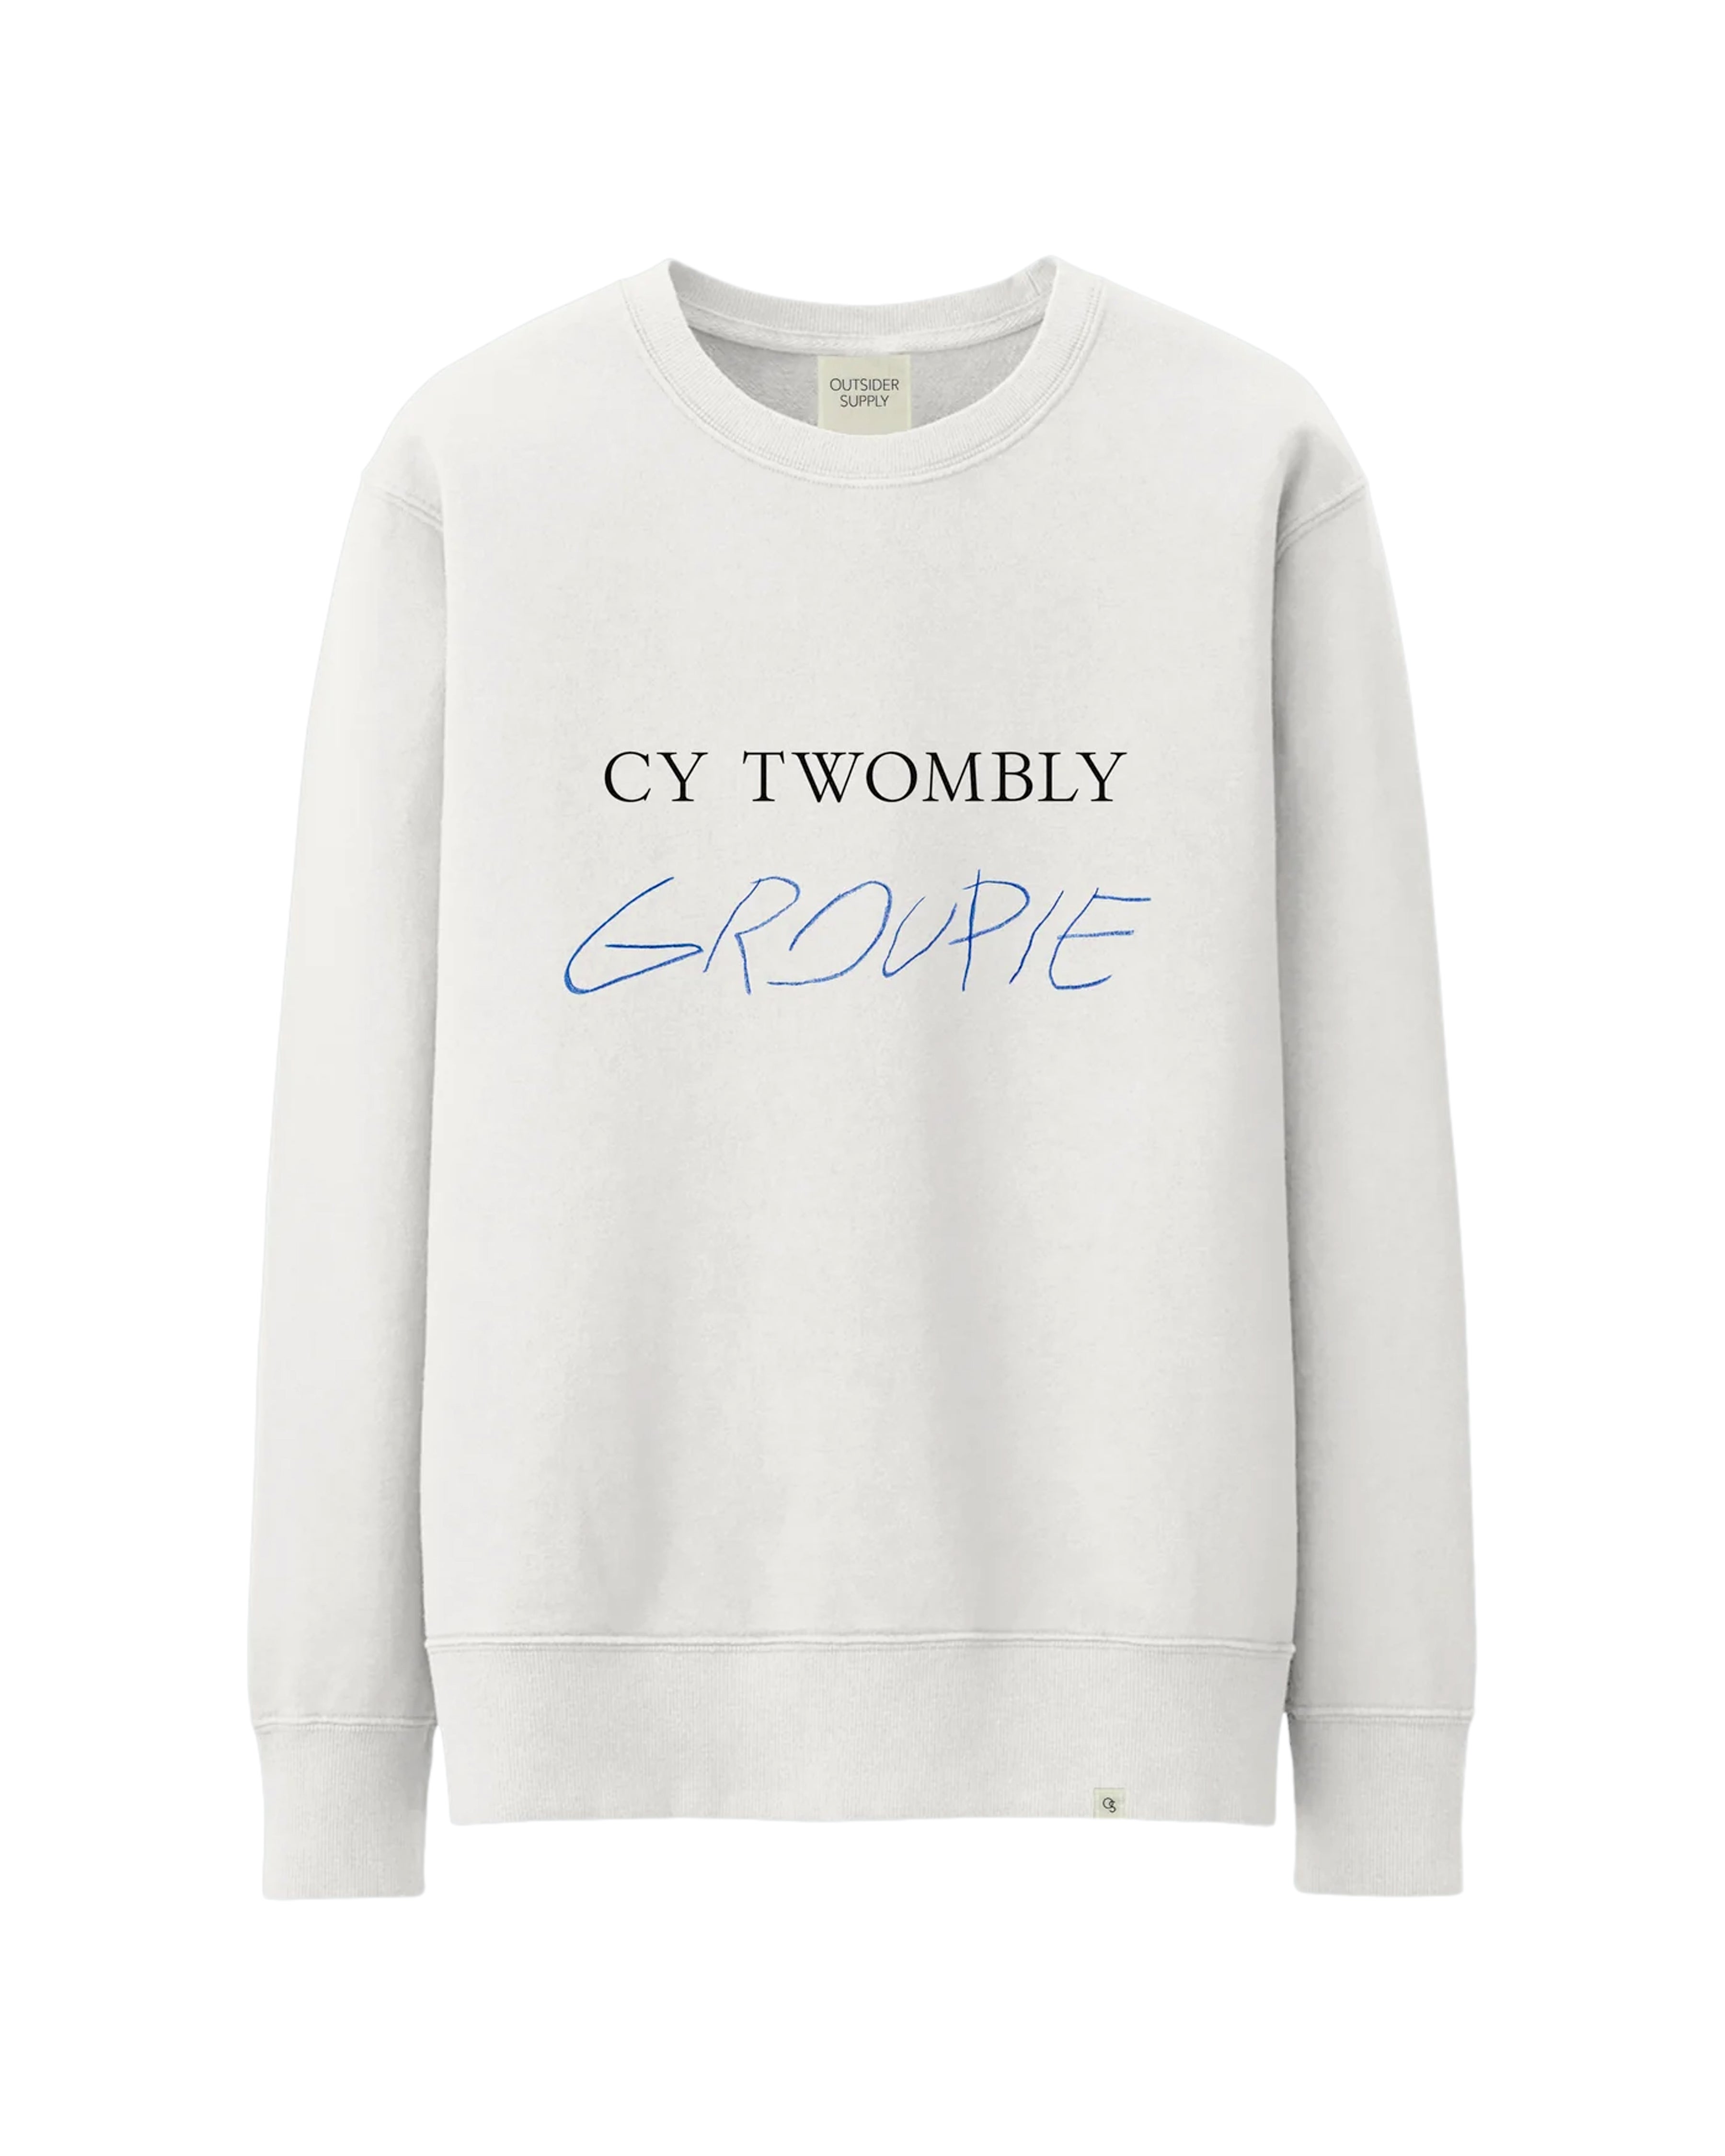 Cy Twombly Groupie Ultra Heavyweight Crewneck